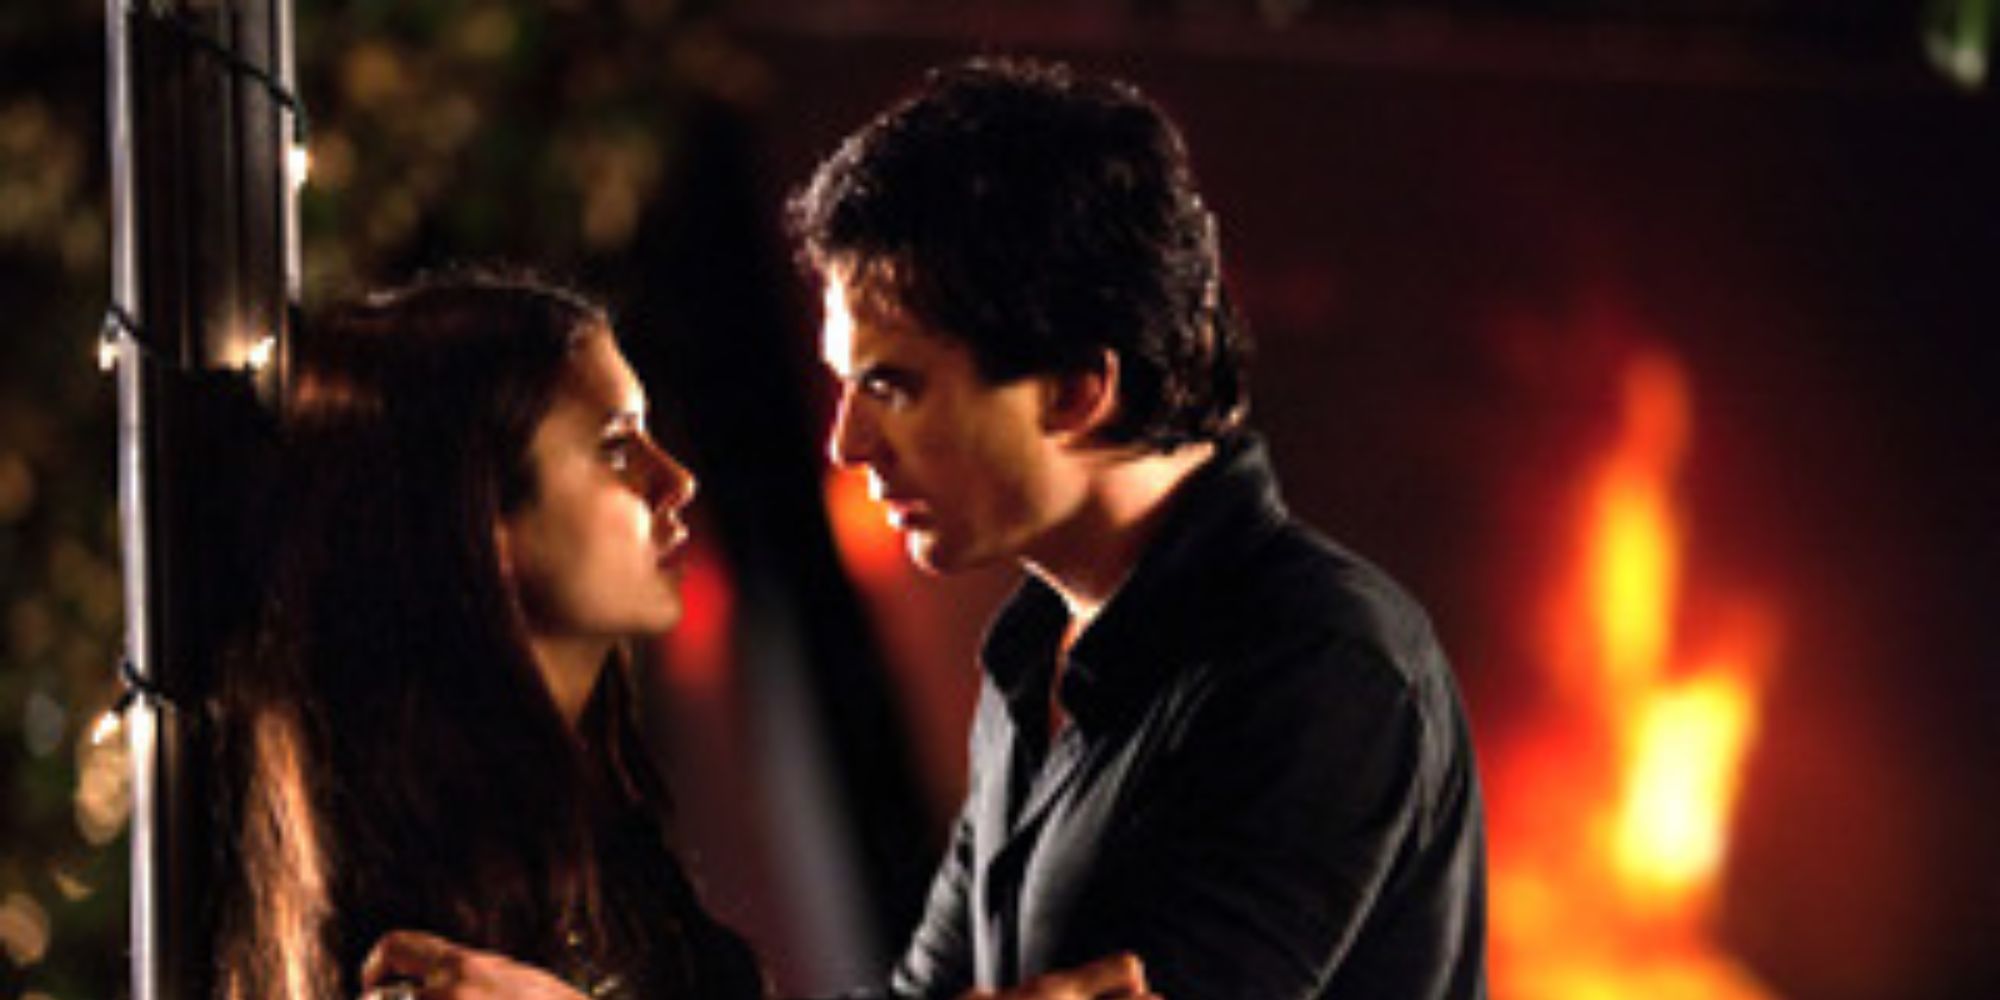 Damon and Elena from The Vampire Diaries standing together